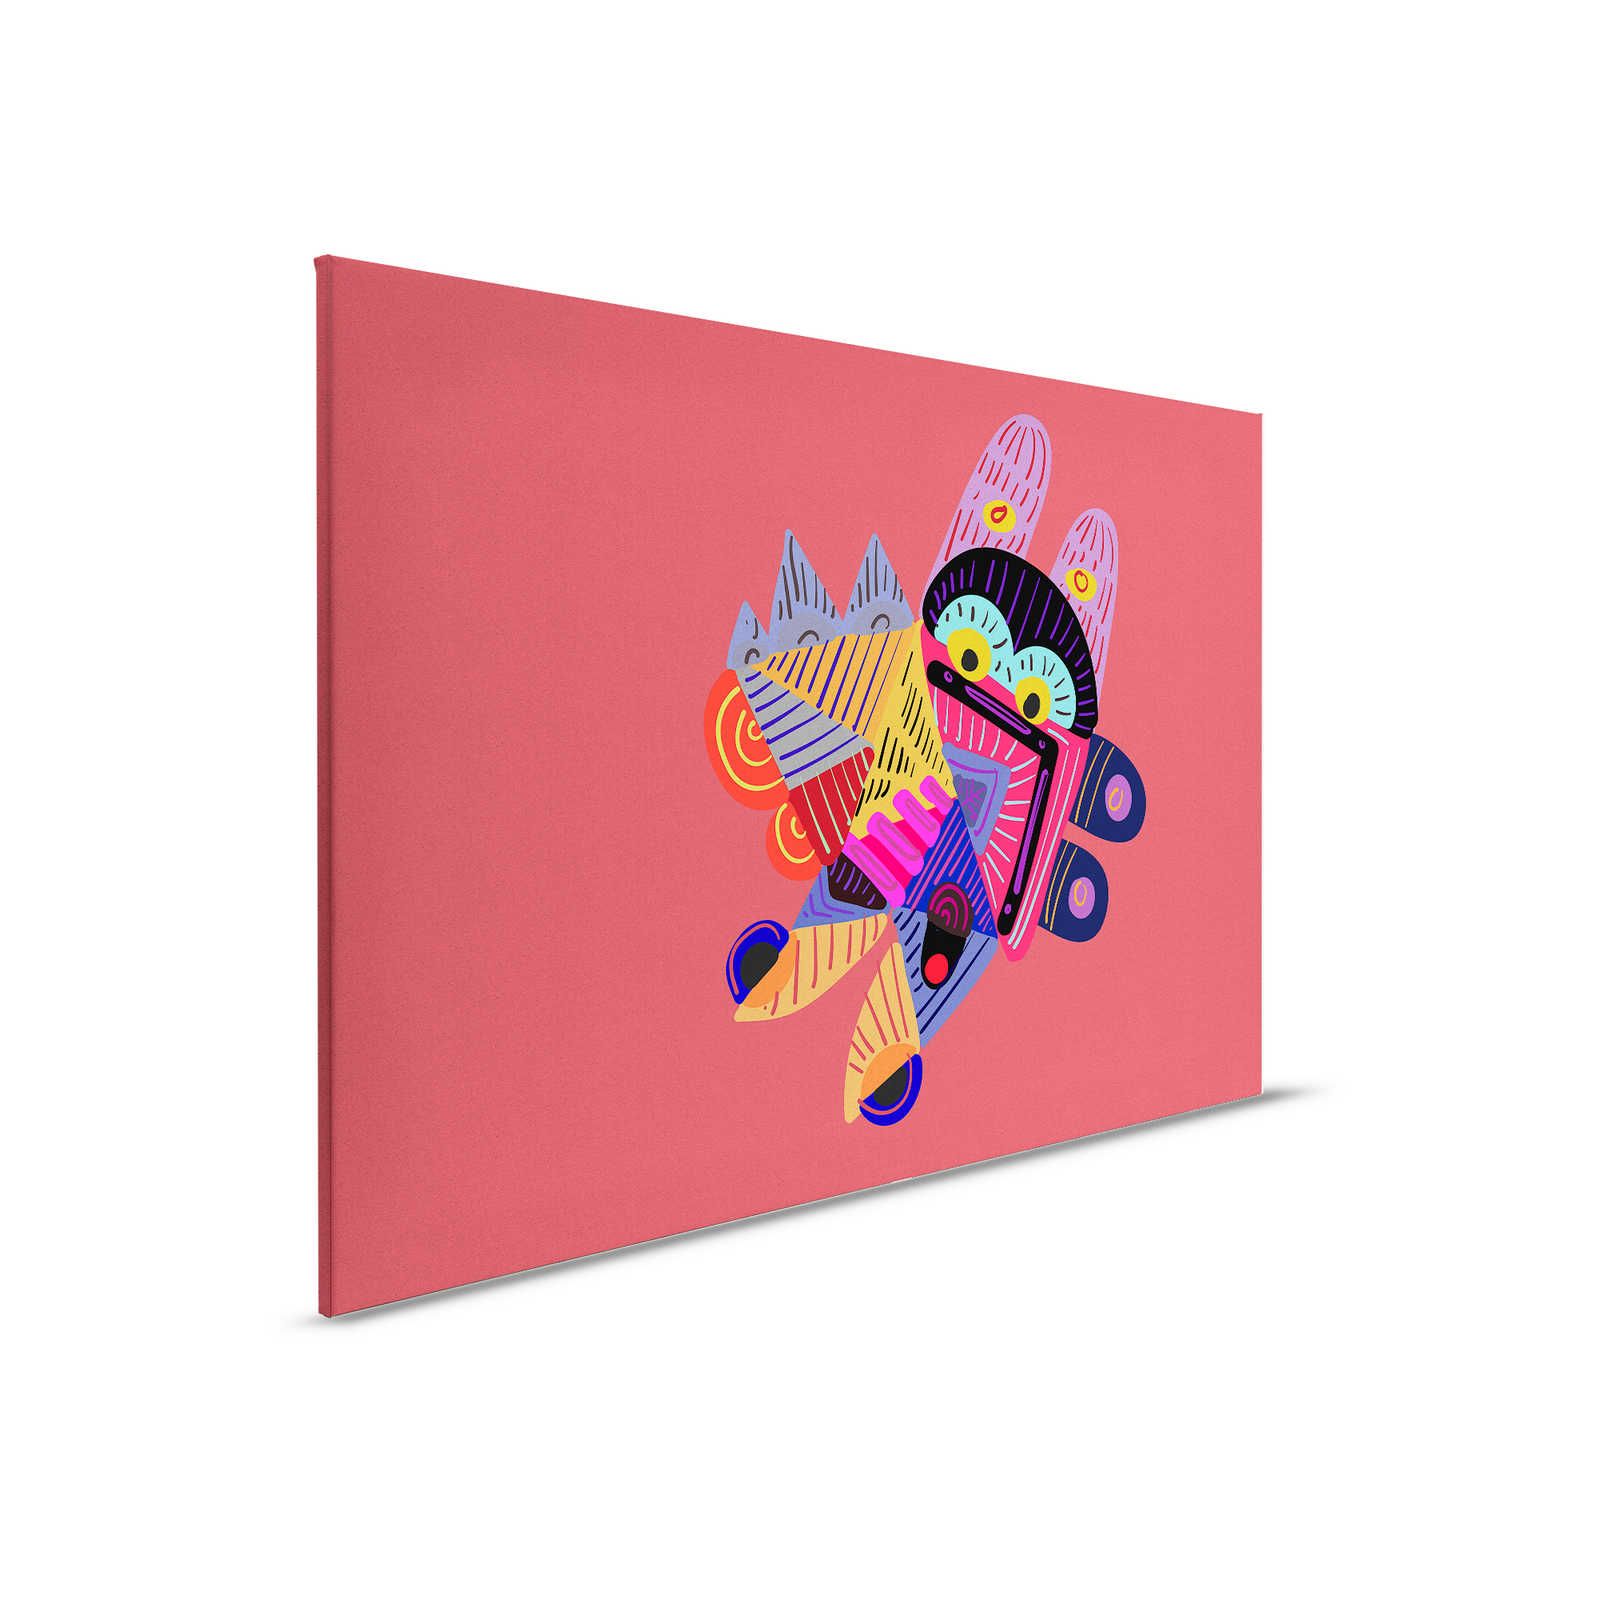         Looney Land 1 - Red Canvas Painting Comic Character In Colourful Design - 0.90 m x 0.60 m
    